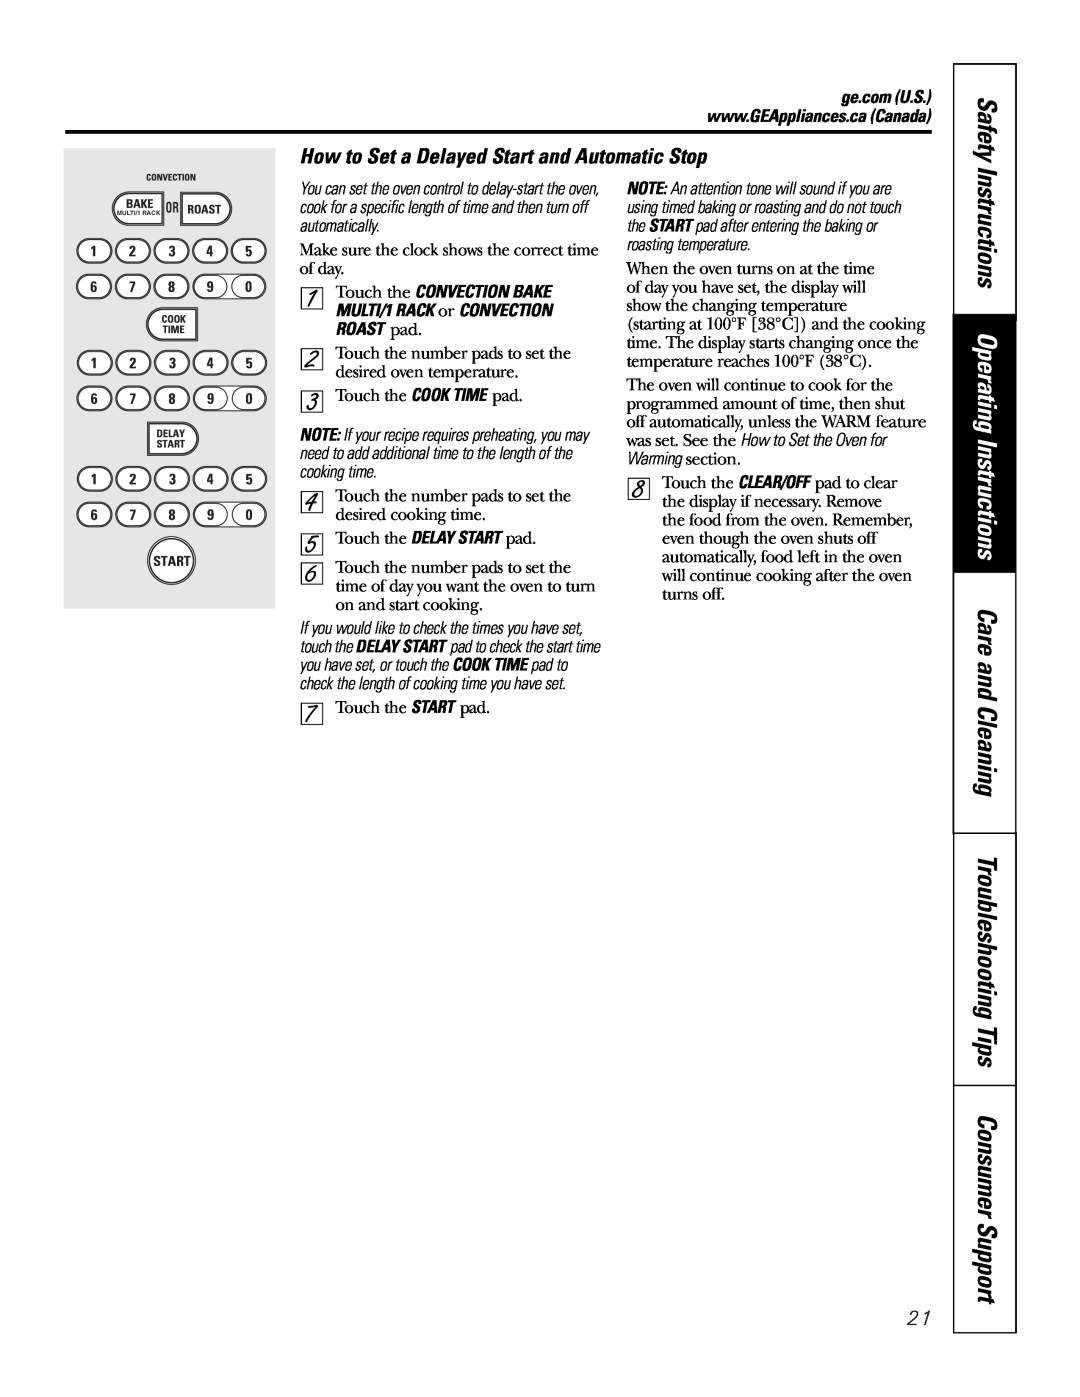 GE PGS968 owner manual How to Set a Delayed Start and Automatic Stop, Make sure the clock shows the correct time of day 